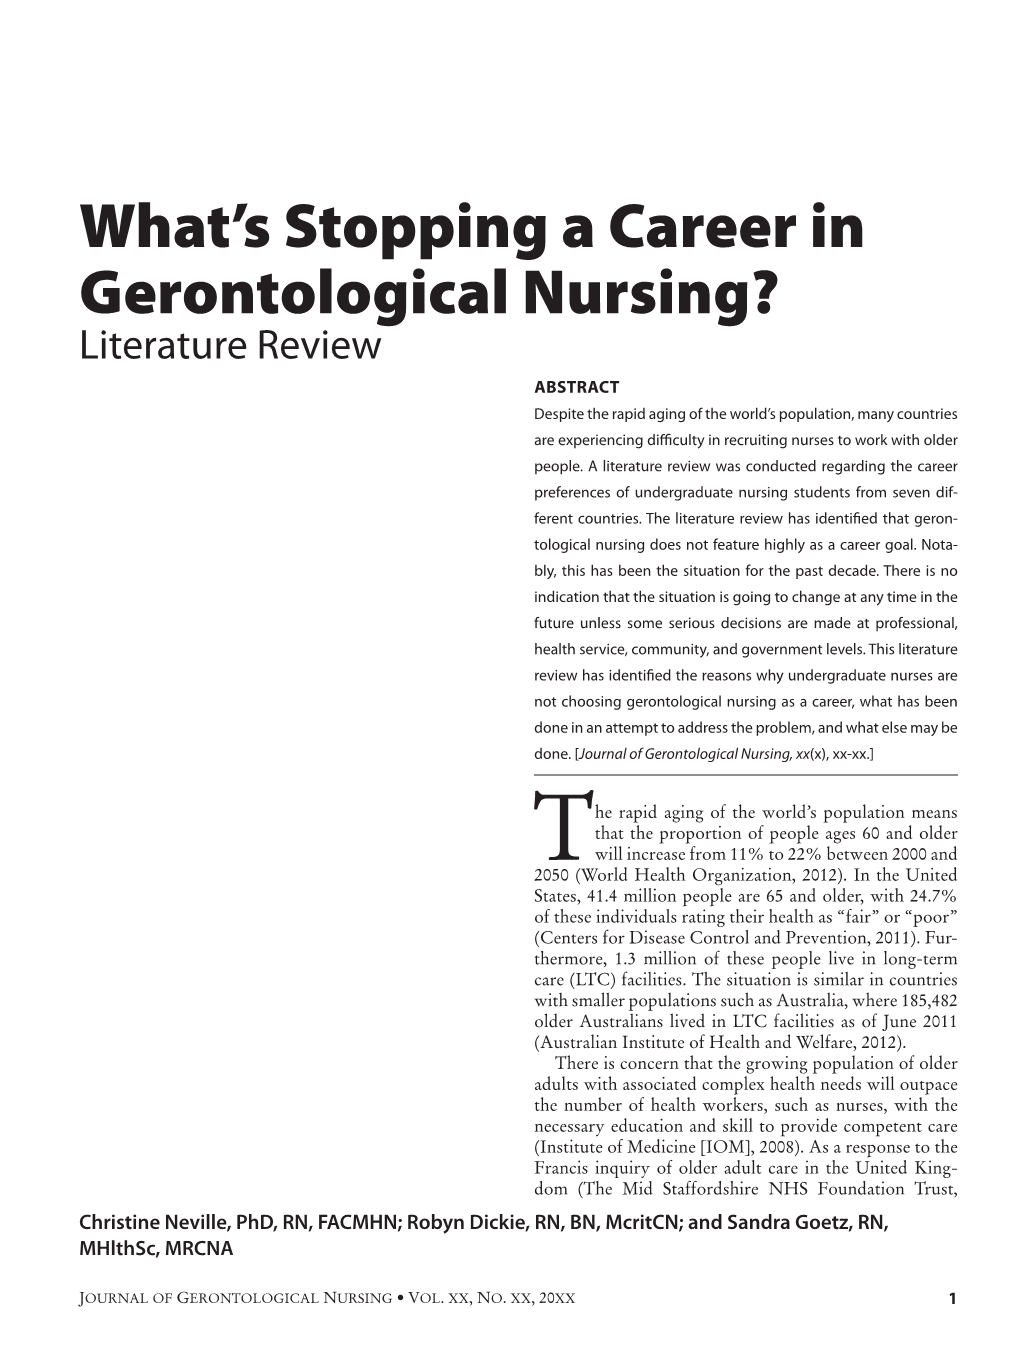 What's Stopping a Career in Gerontological Nursing?